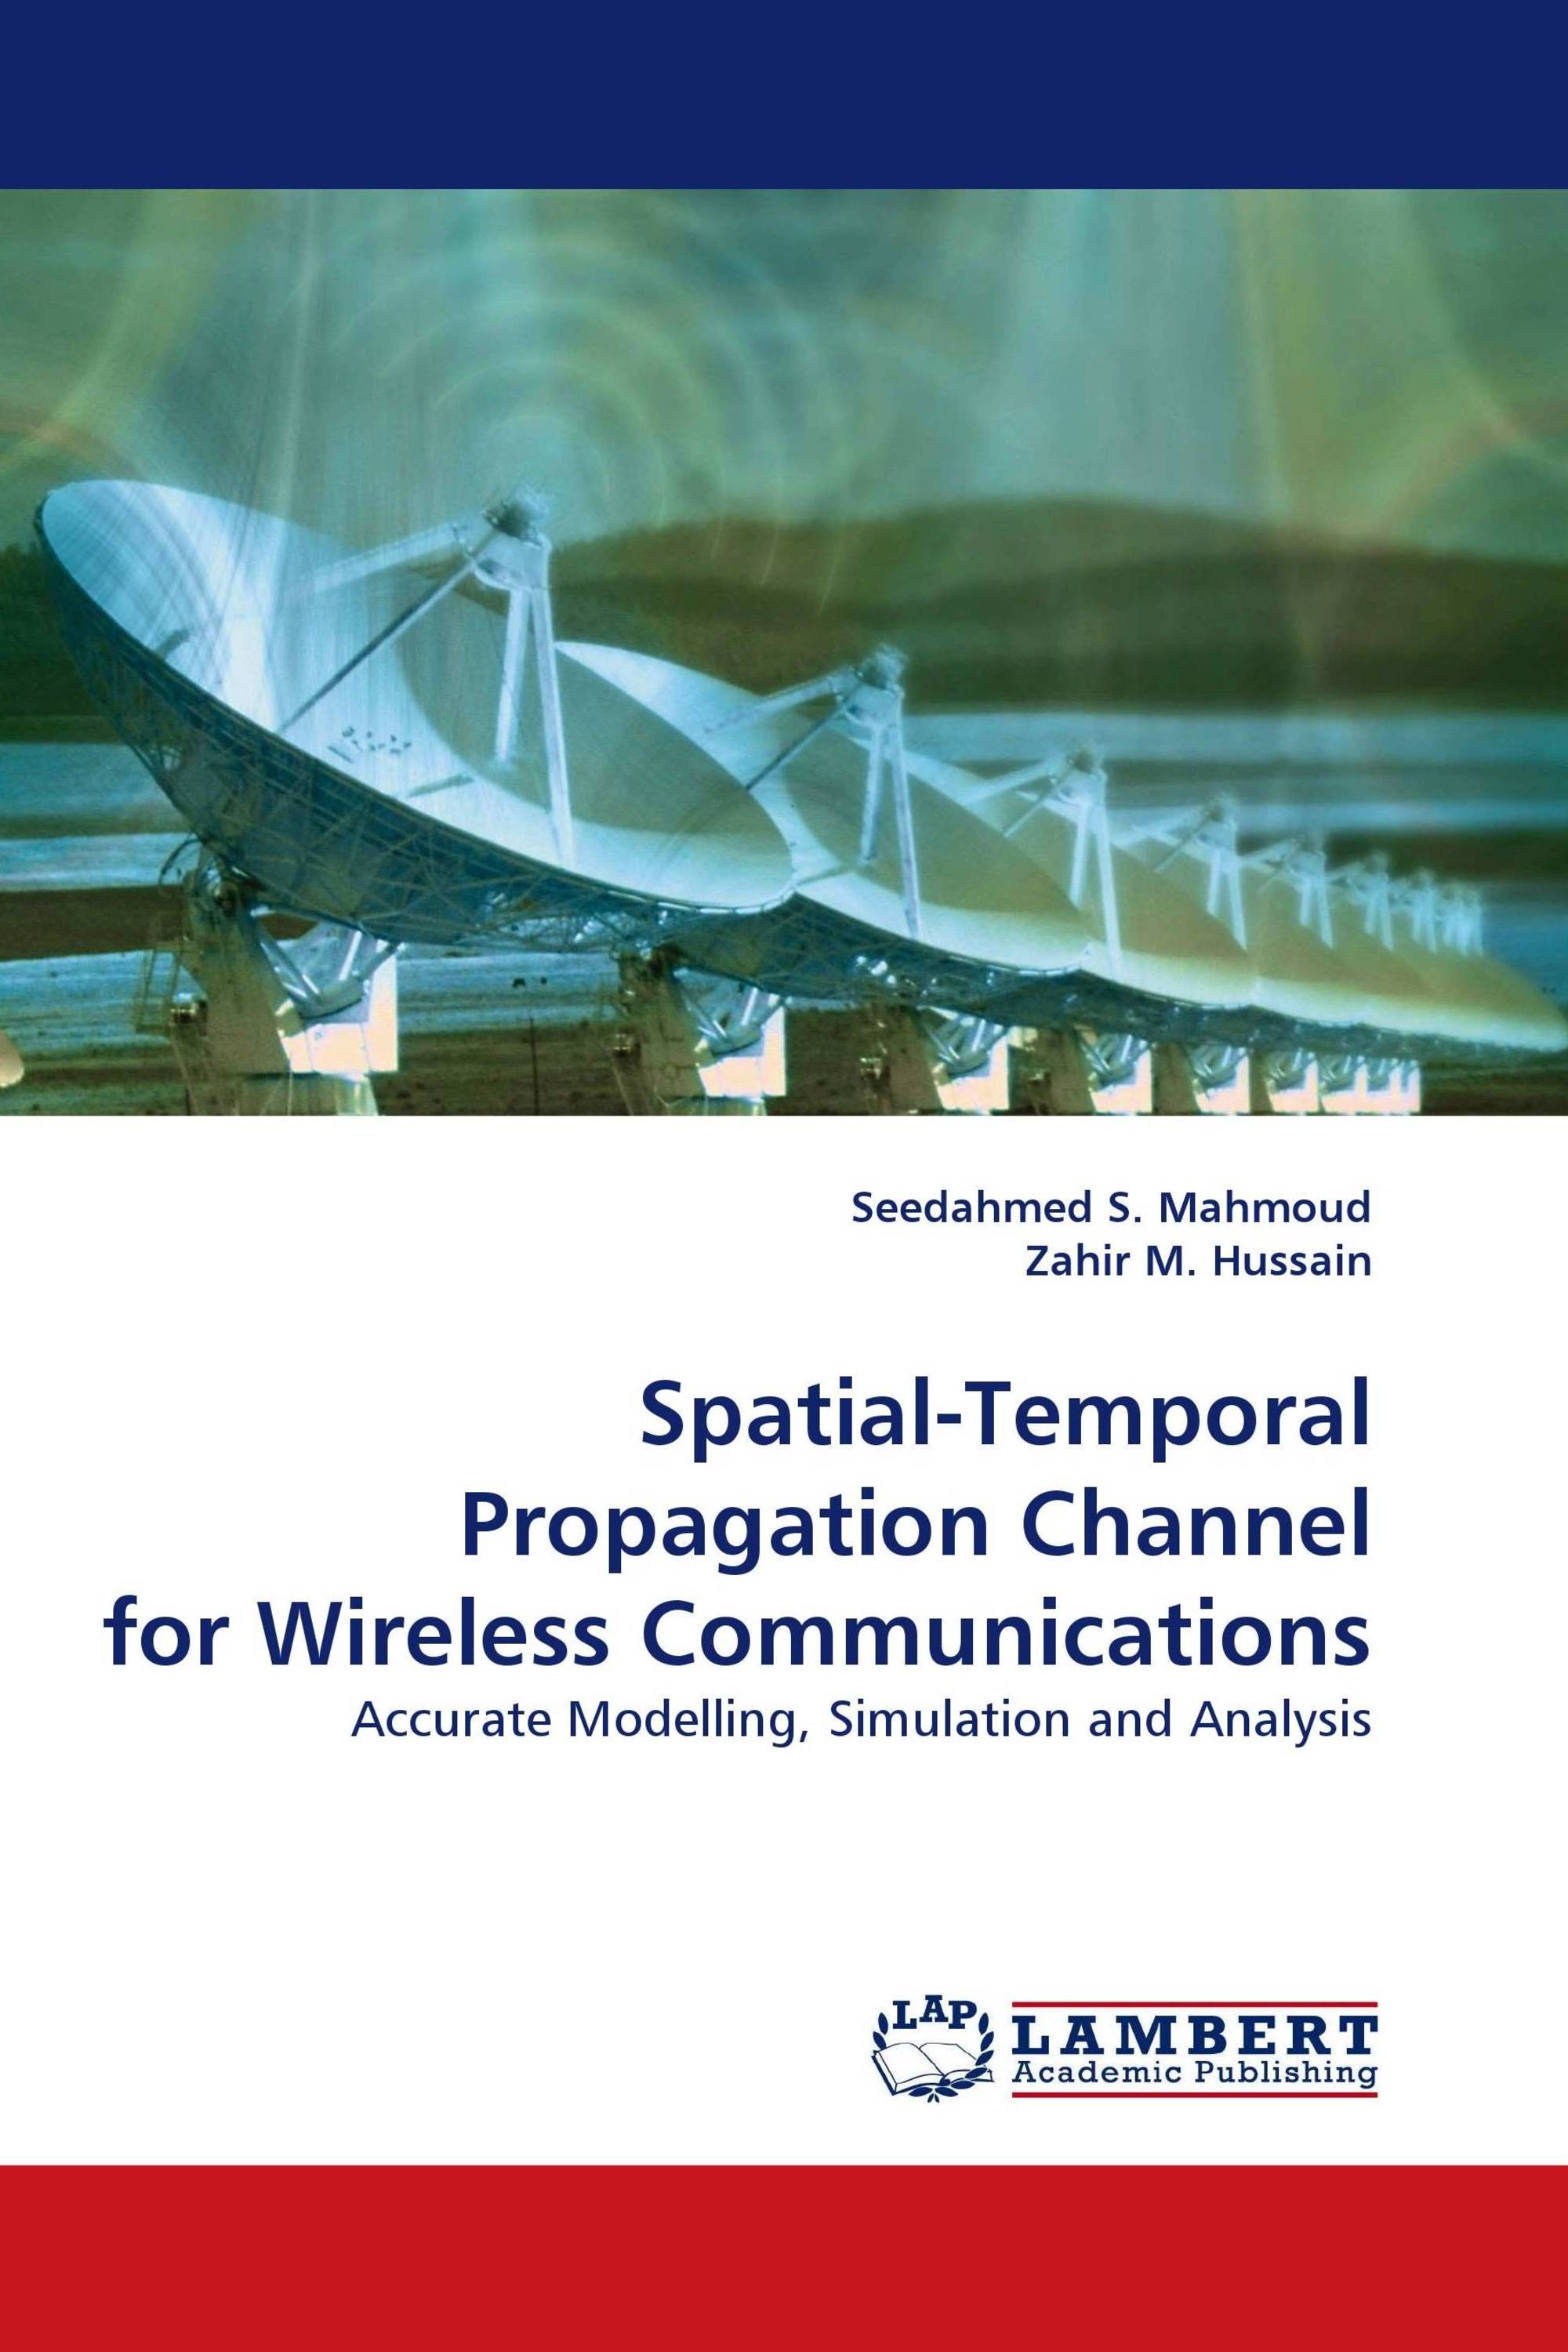 Spatial-Temporal Propagation Channel for Wireless Communications